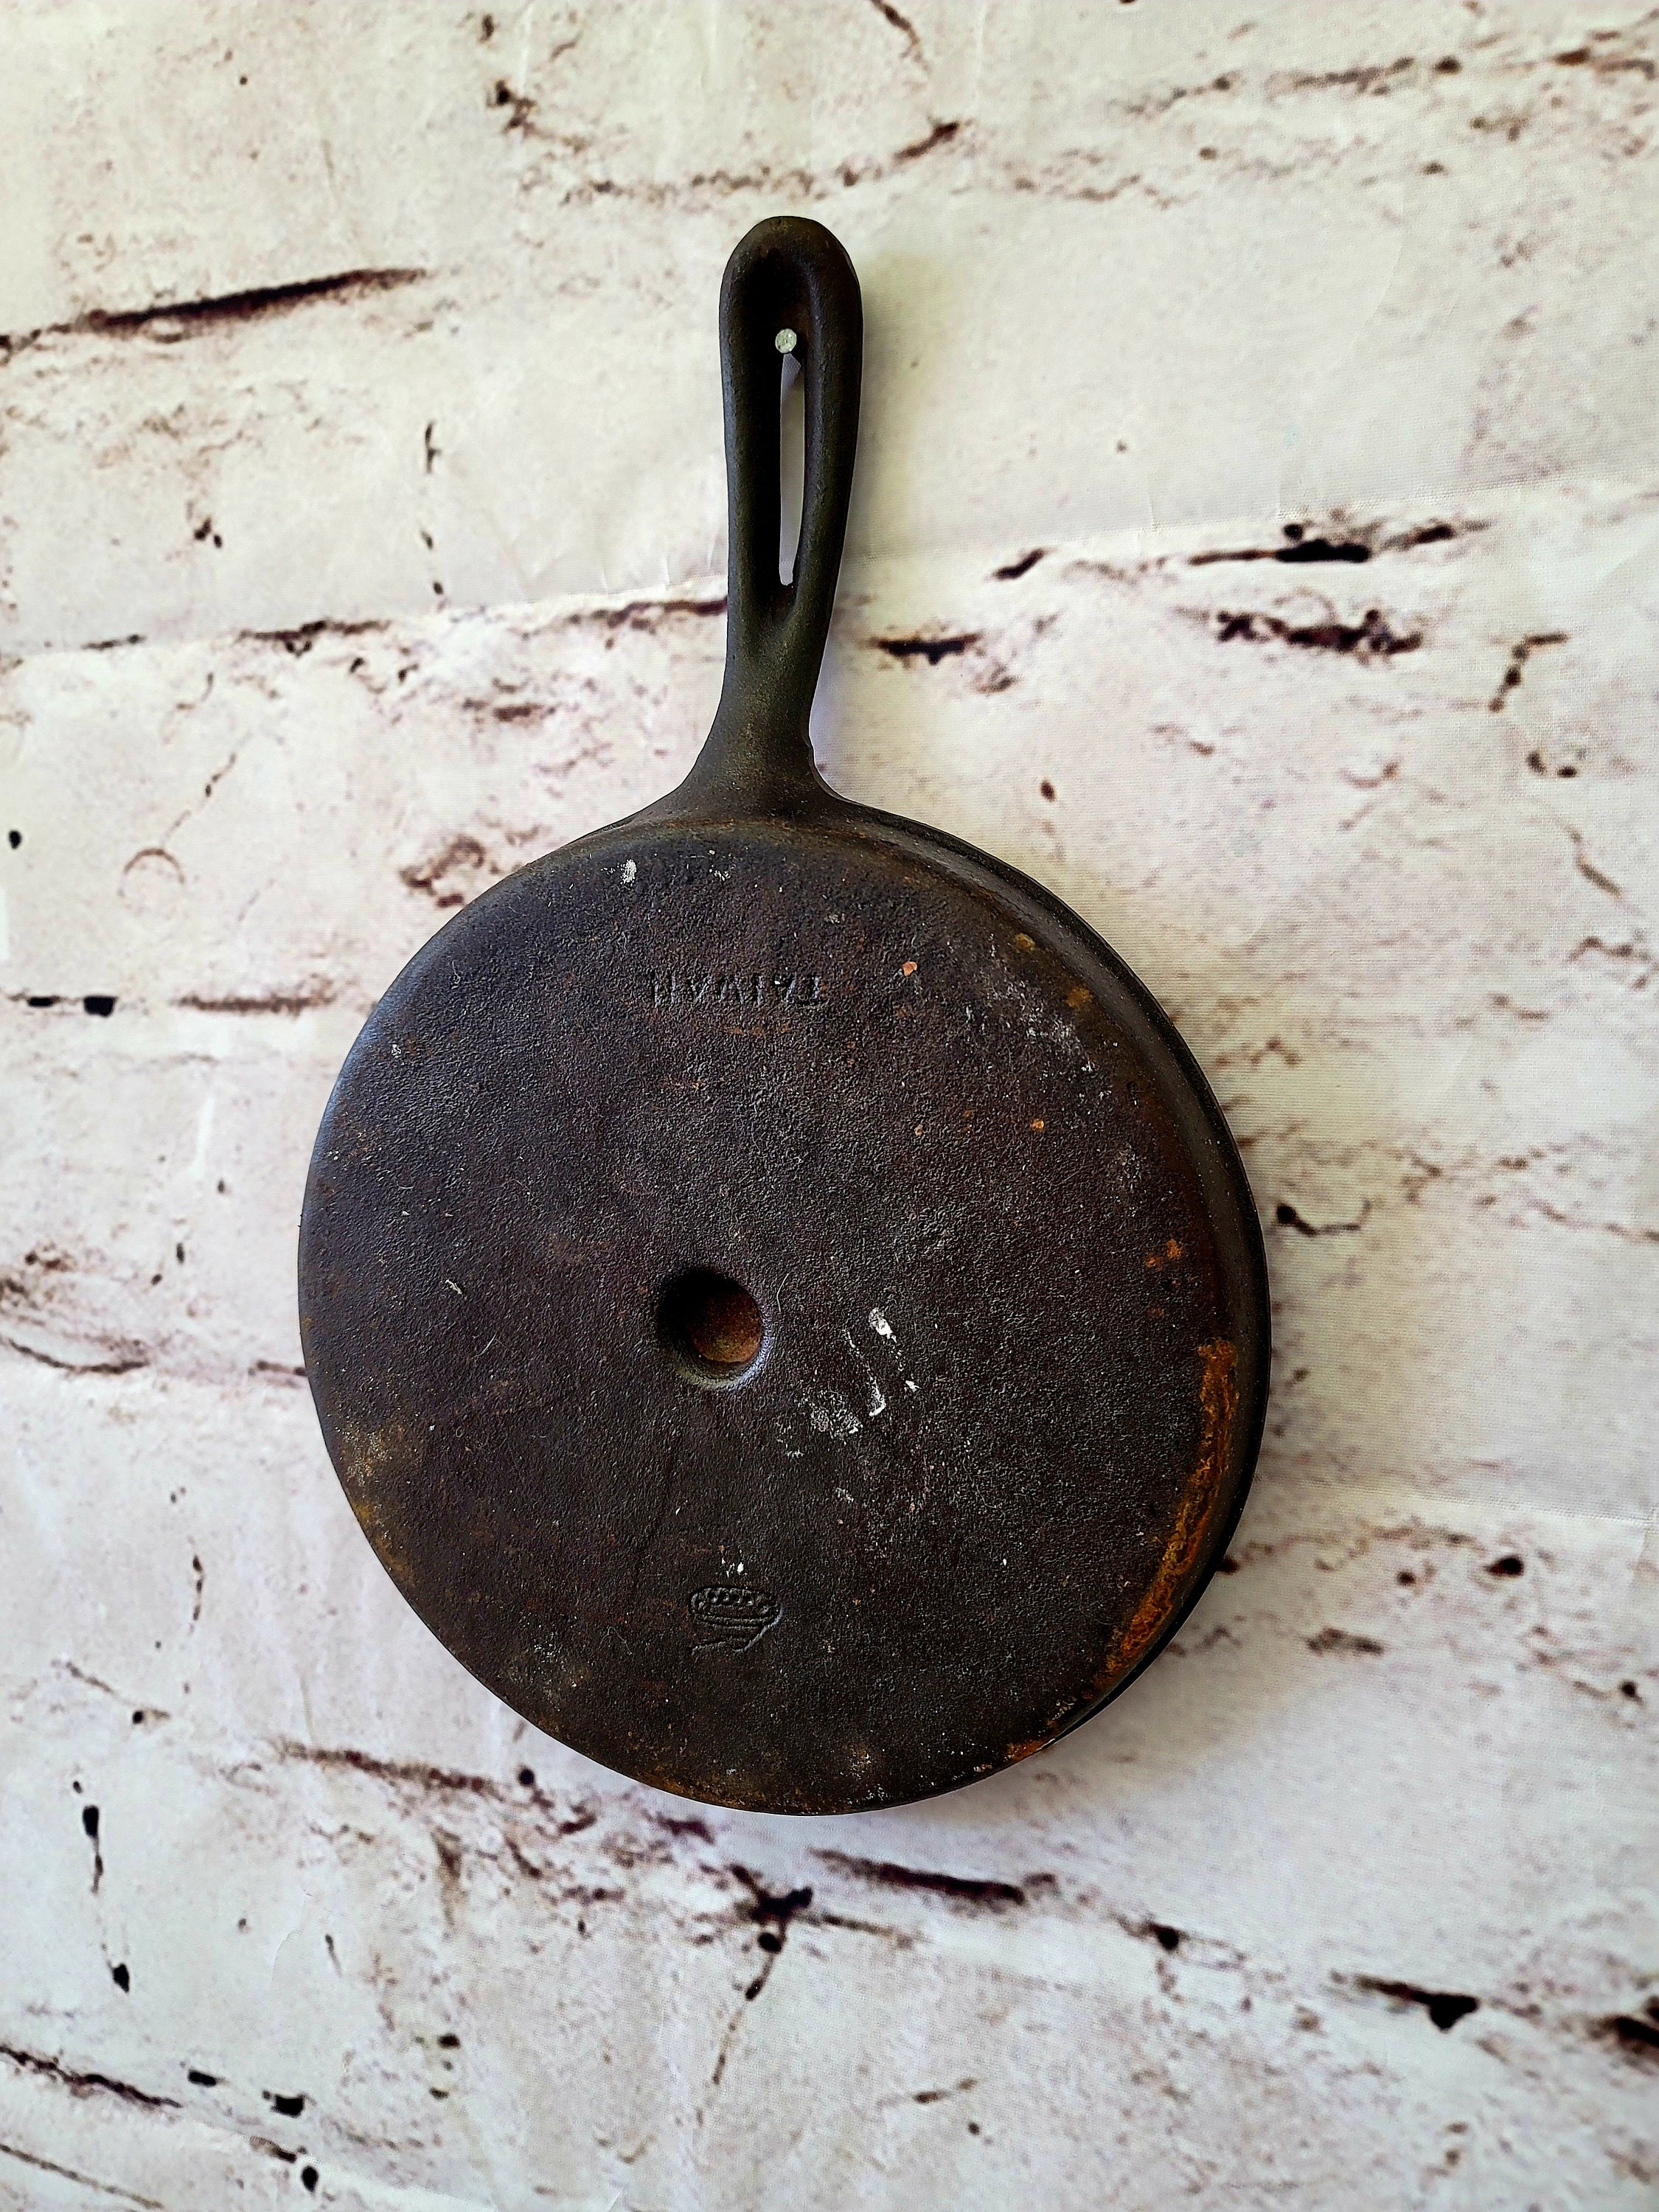 Vintage 8 Inch Cast Iron Skillet #4 Frying Pan Made in Taiwan